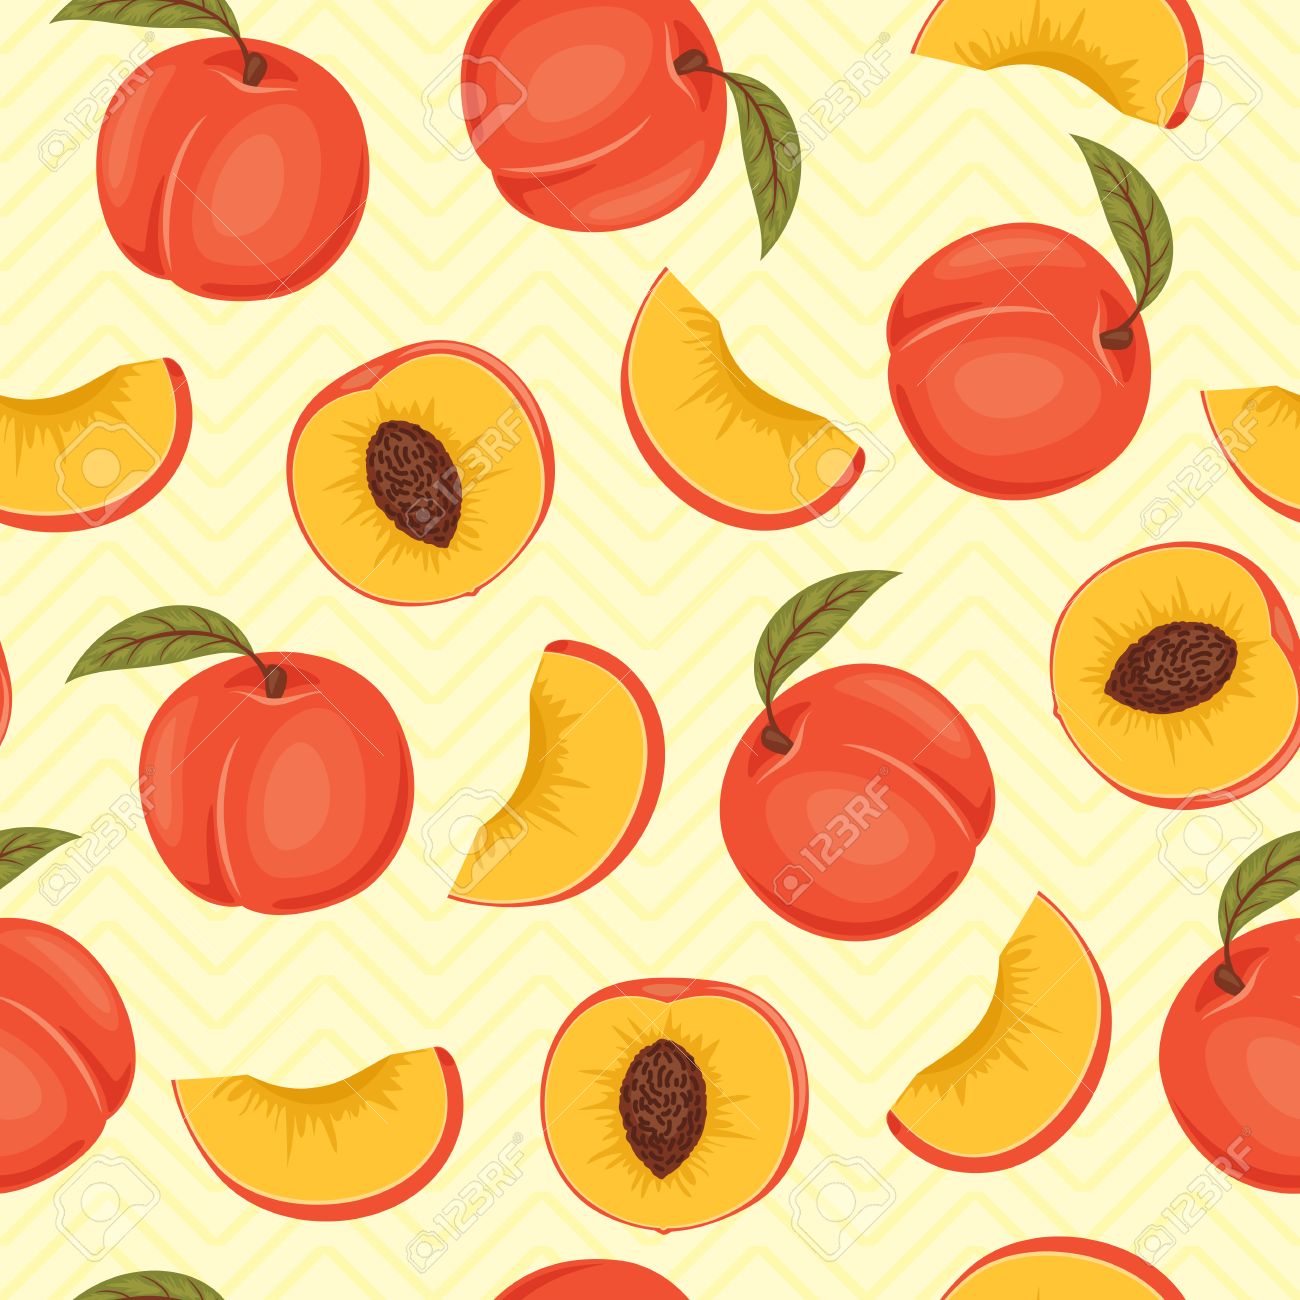 Peach Seamless Pattern Vector Wallpaper Peaches With